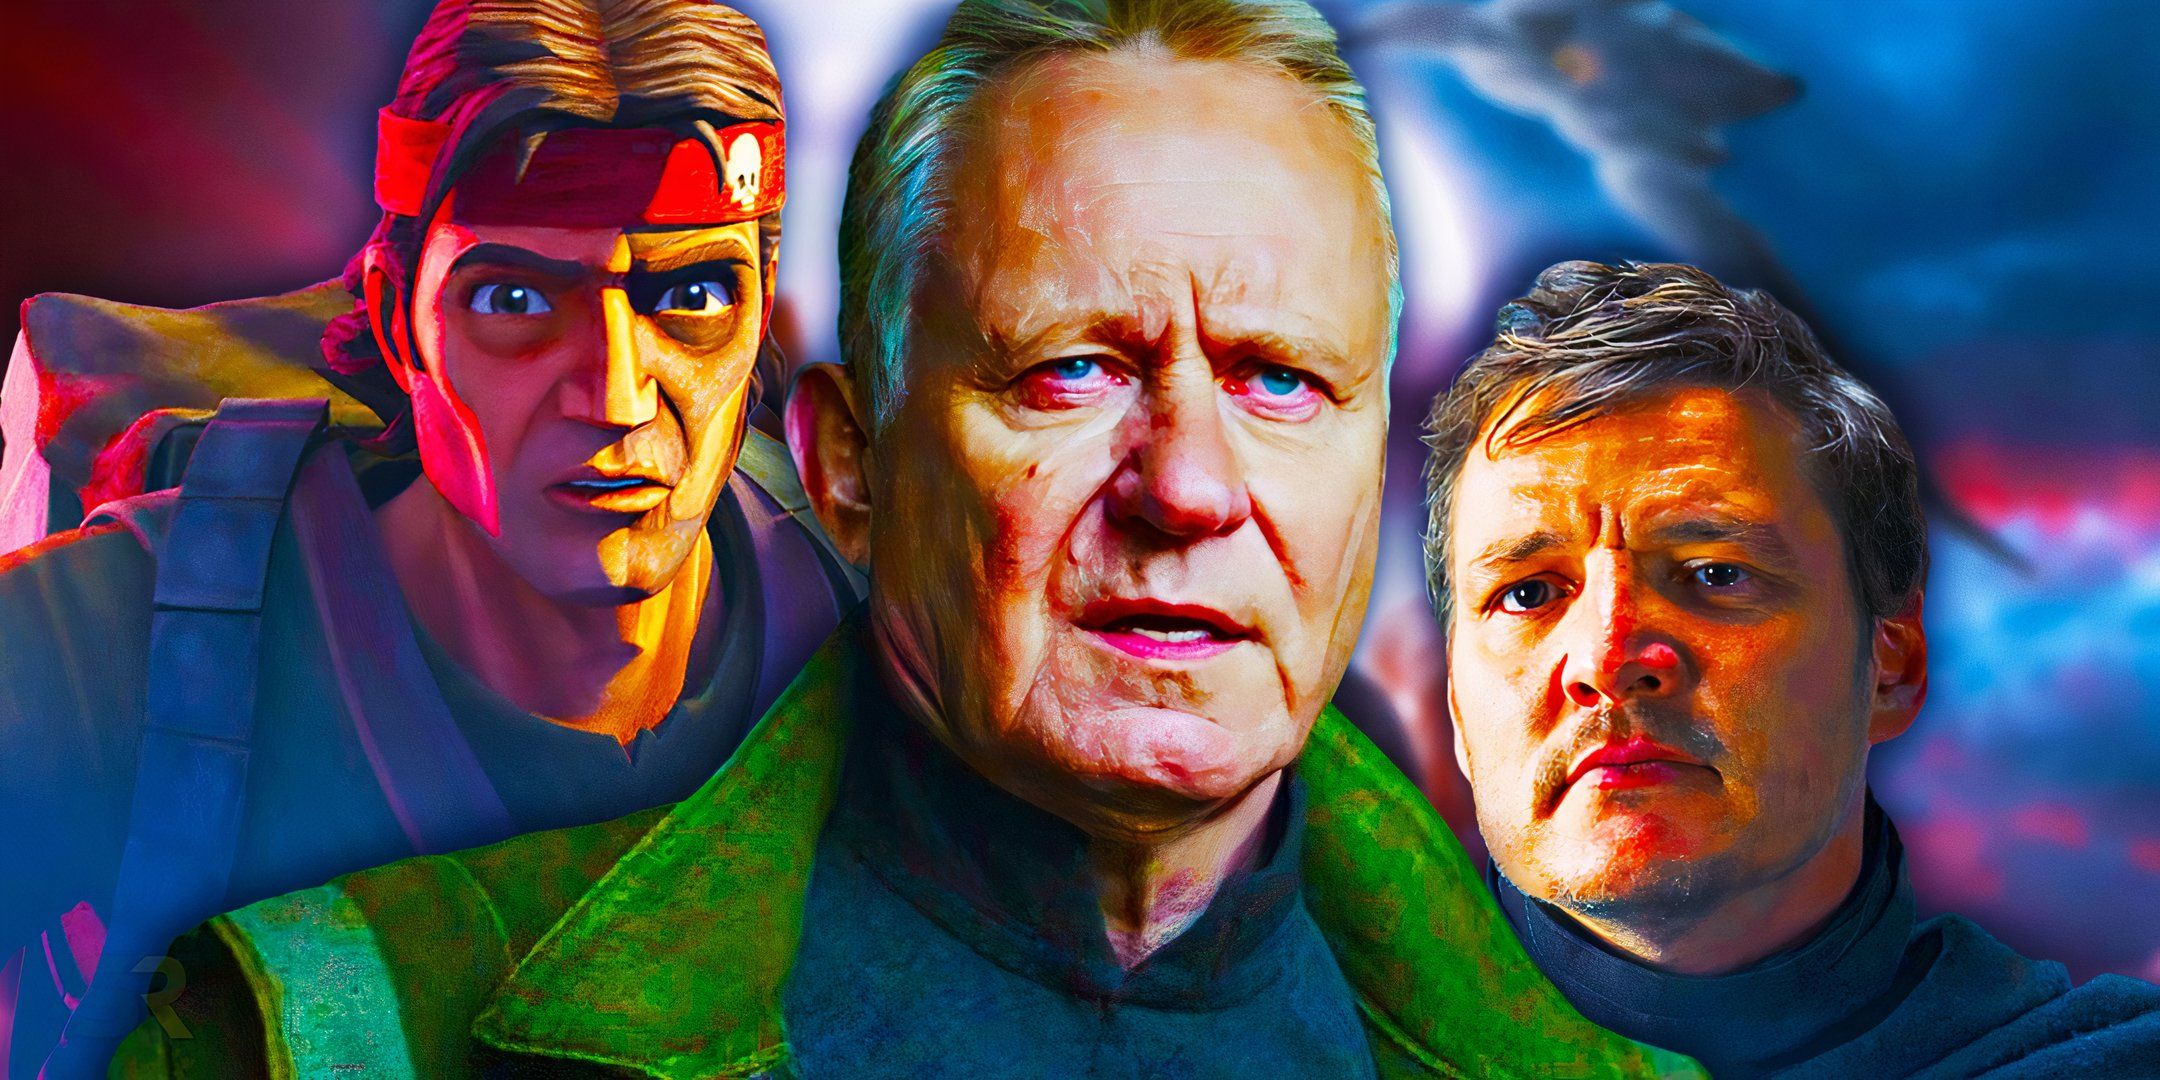 Hunter of The Bad Batch, Stellan Skarsgård's Luthen Rael of Andor, and Pedro Pascal's Din Djarin of The Mandalorian edited together in Star Wars